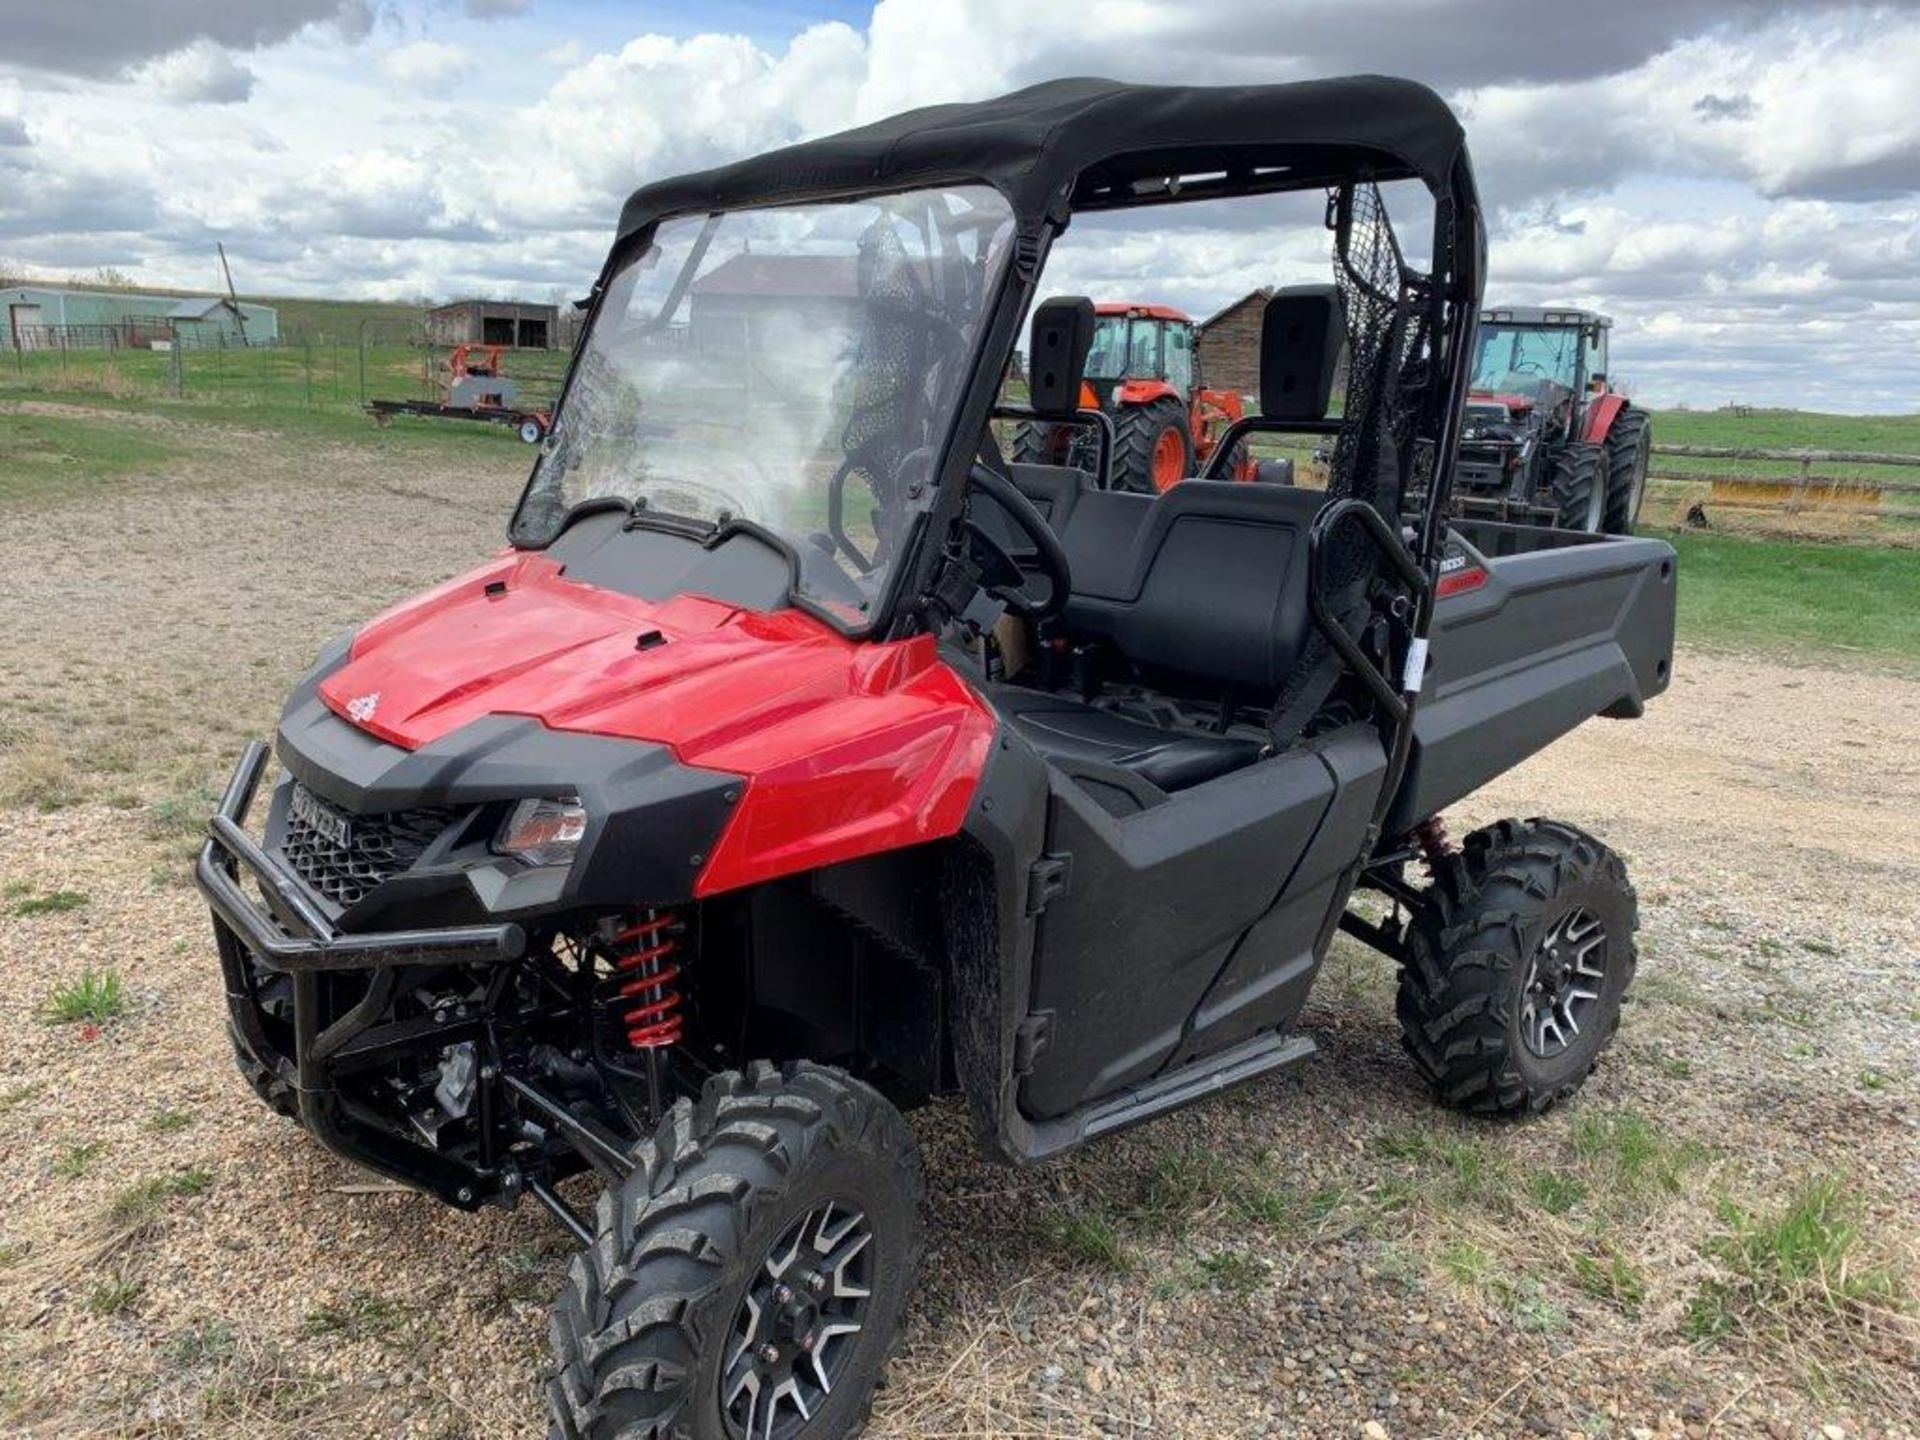 2021 HONDA PIONEER 700 4X4 SIDE-BY-SIDE W/ CARGO BOX, ONLY 97 KM SHOWING